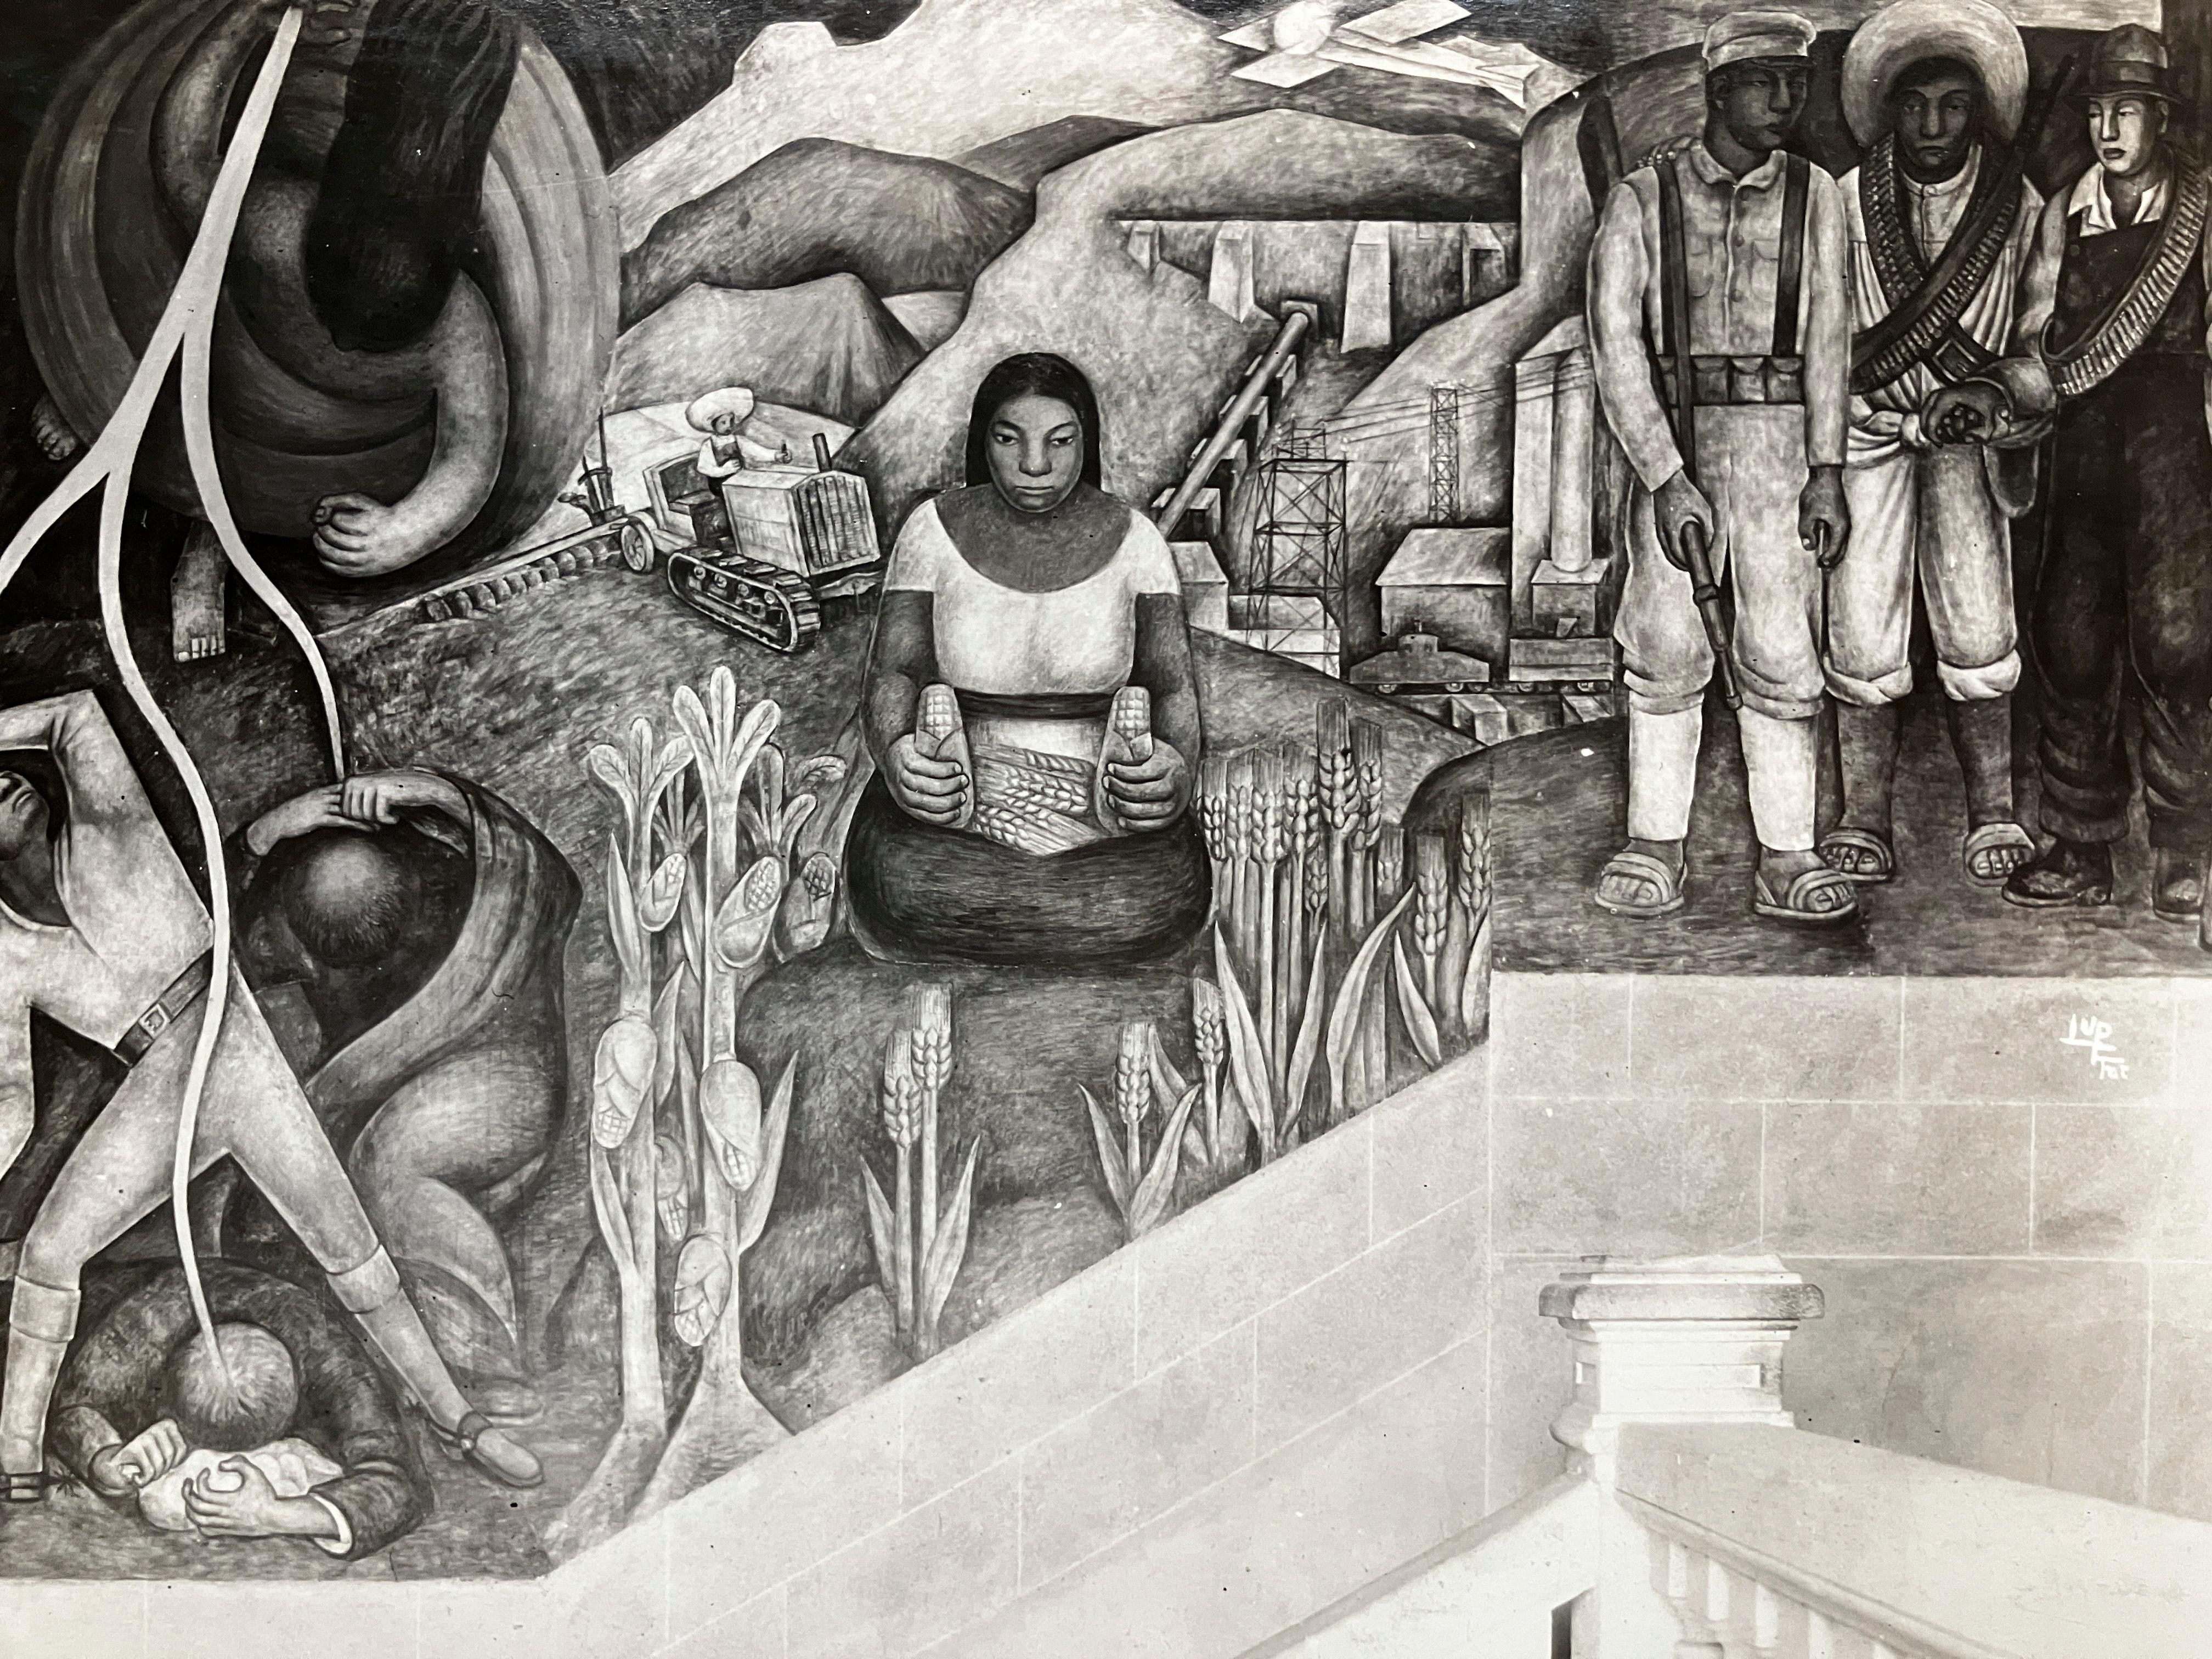 An original 1920s silver gelatin print by photographer Tina Modotti of the Diego Rivera mural  "Lightning Striking Down the Destructive forces in Society Mother Nature, Harmony Between Land Worker, City Worker and Soldier".  Archivally matted to 16”